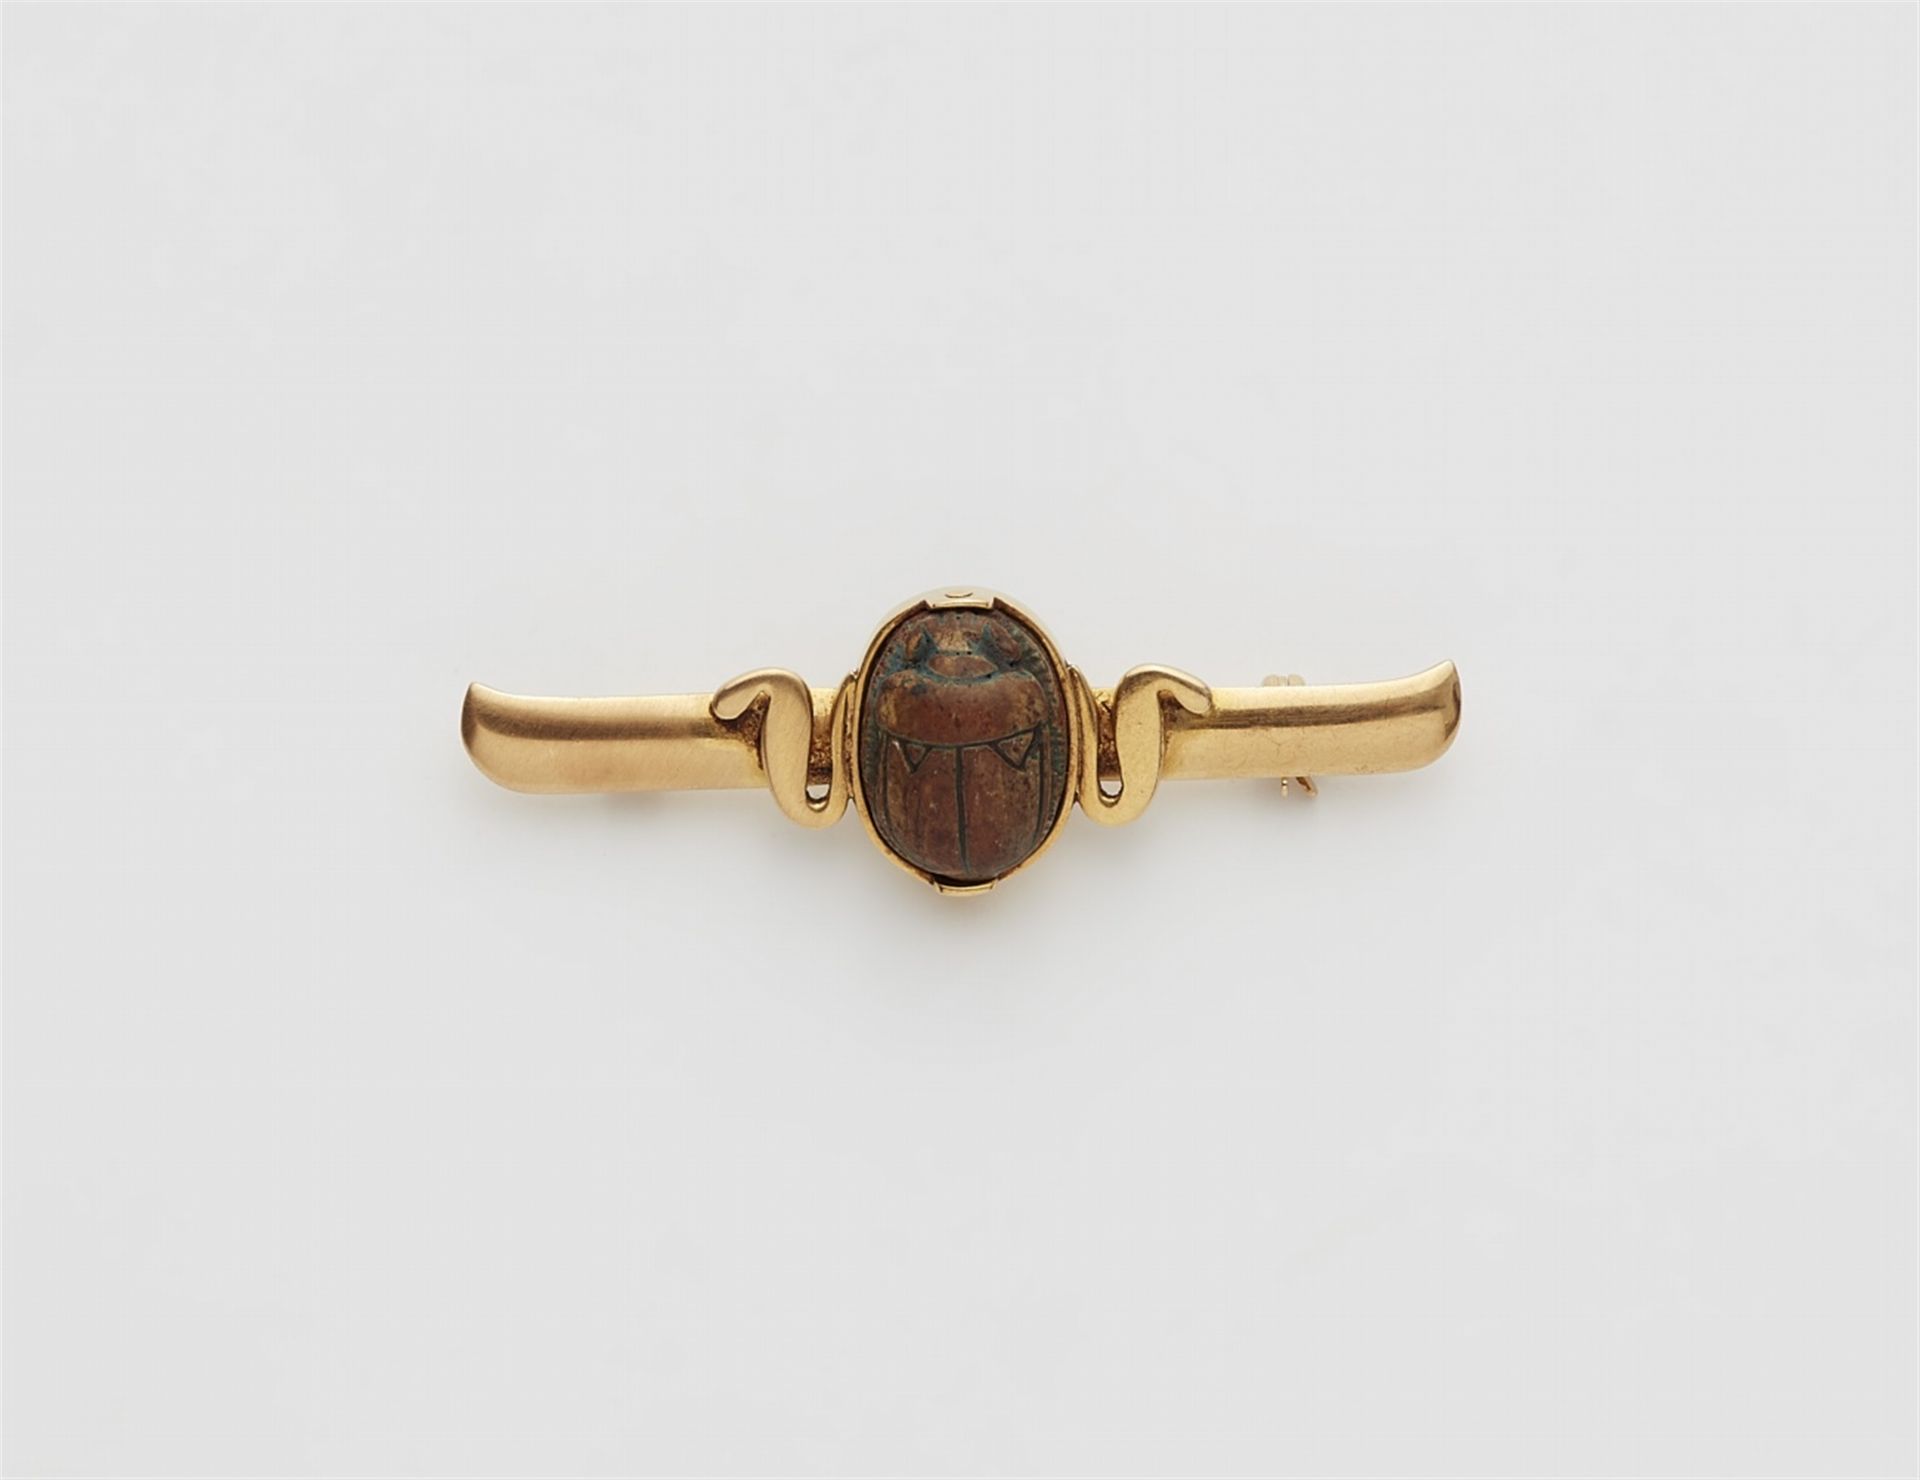 An 18k gold brooch with an Egyptian scarab amulet